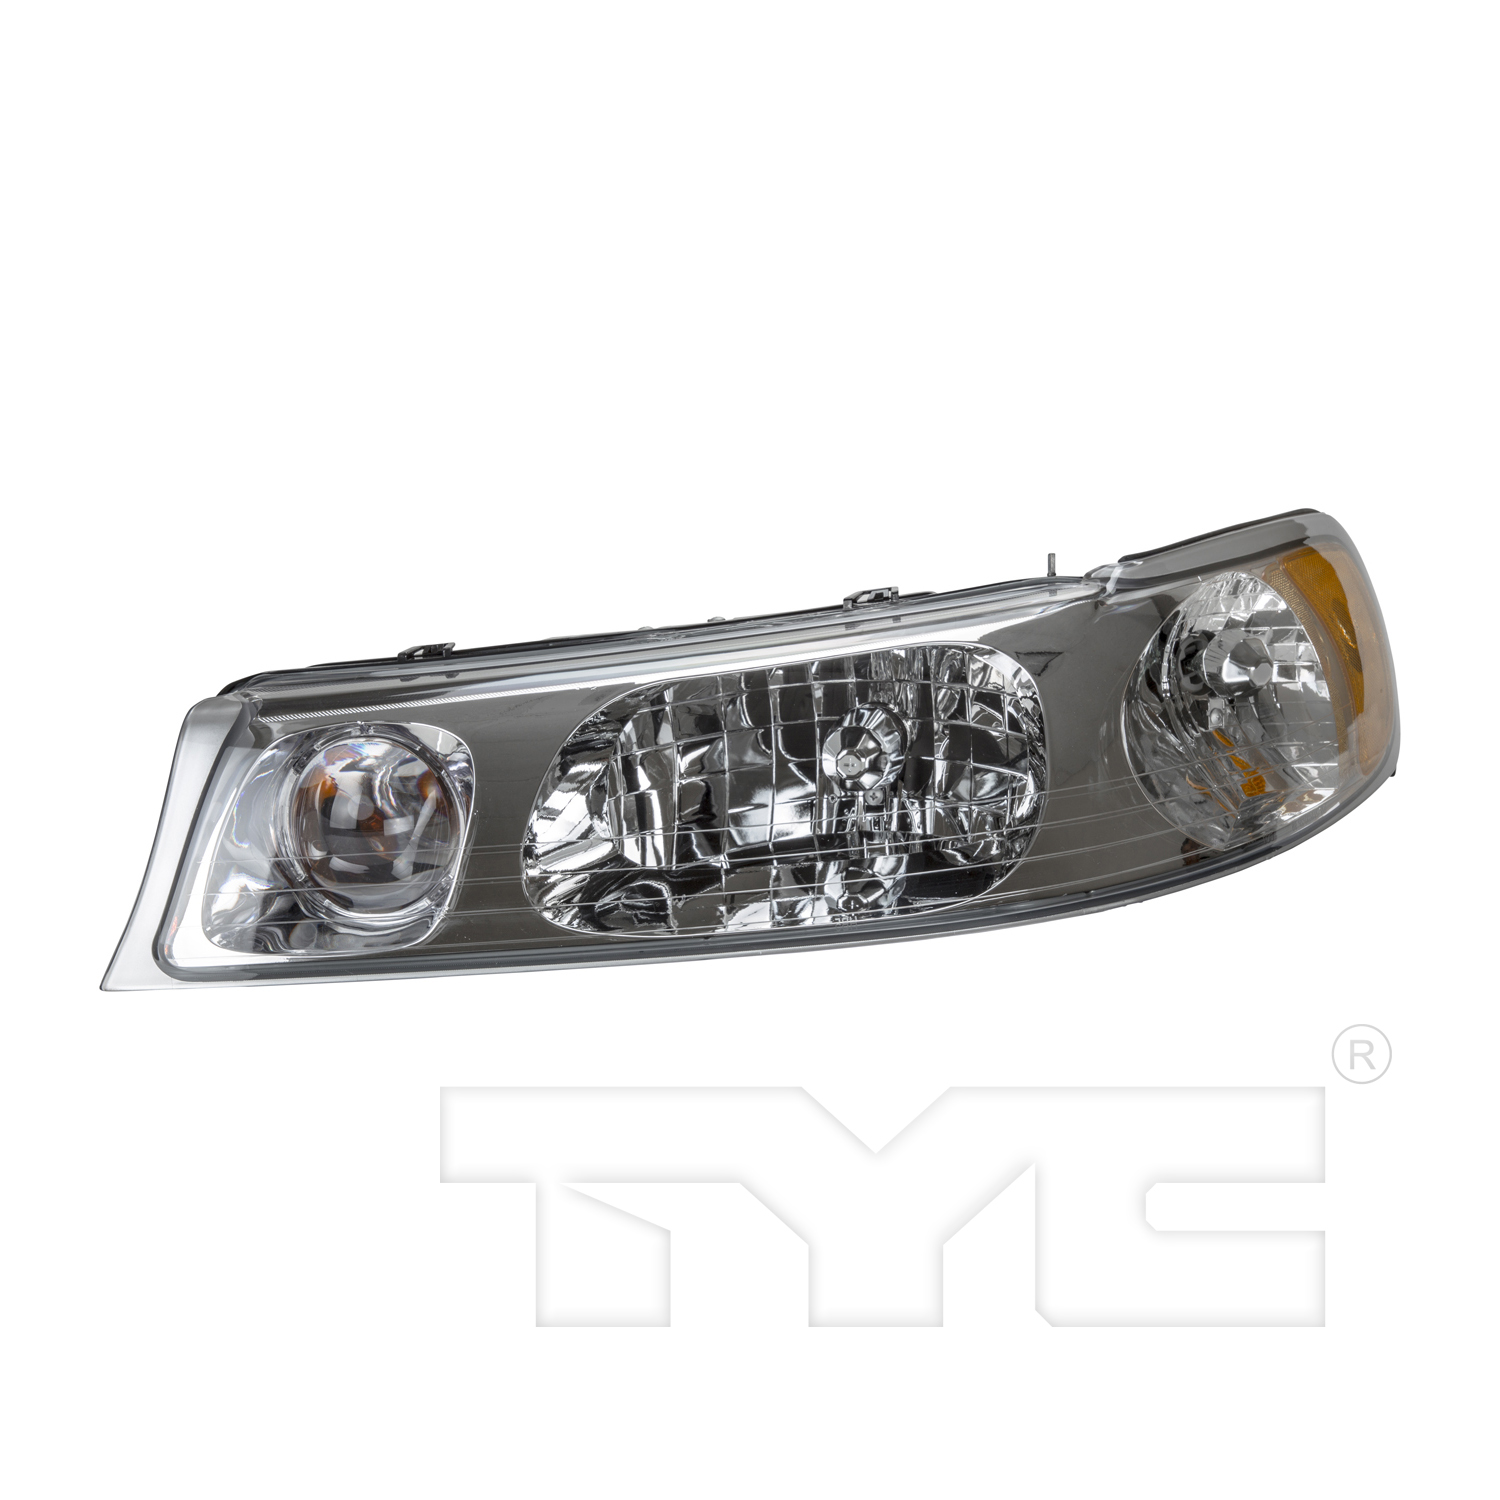 Aftermarket HEADLIGHTS for LINCOLN - TOWN CAR, TOWN CAR,98-02,LT Headlamp assy composite